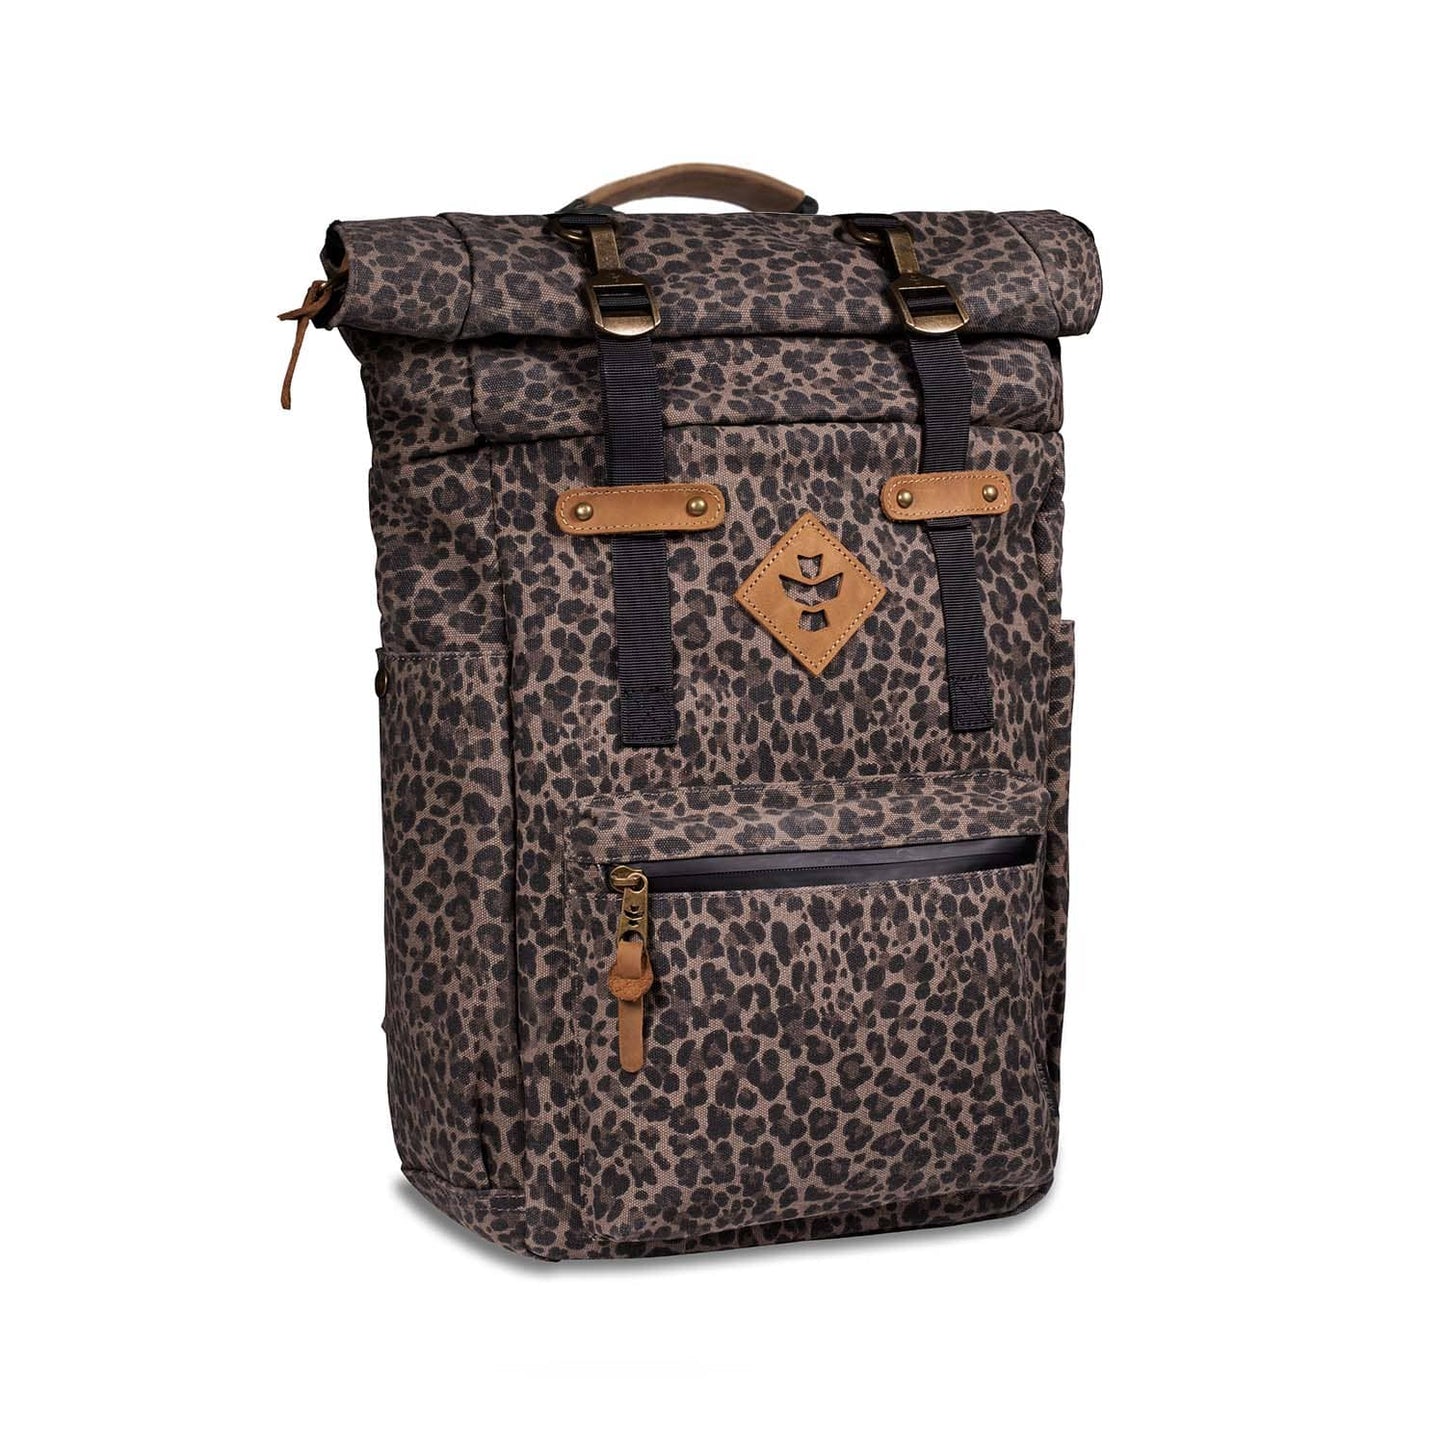 Revelry Supply Travel Bag Leopard The Drifter - Smell Proof Rolltop Backpack